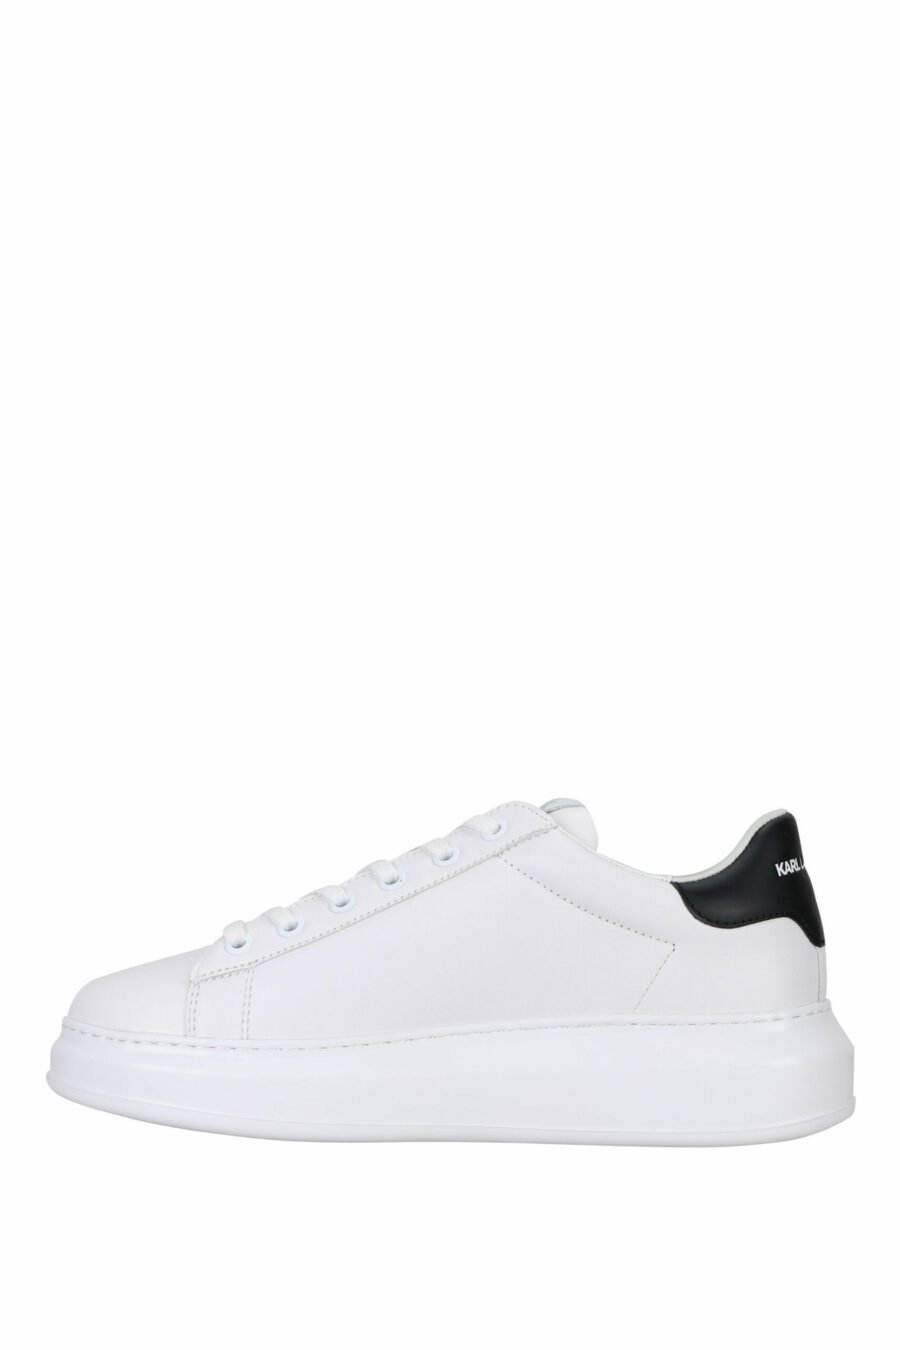 White leather trainers "kapri mens" with black detail and rubber "karl" minilogo - 5059529362347 2 scaled